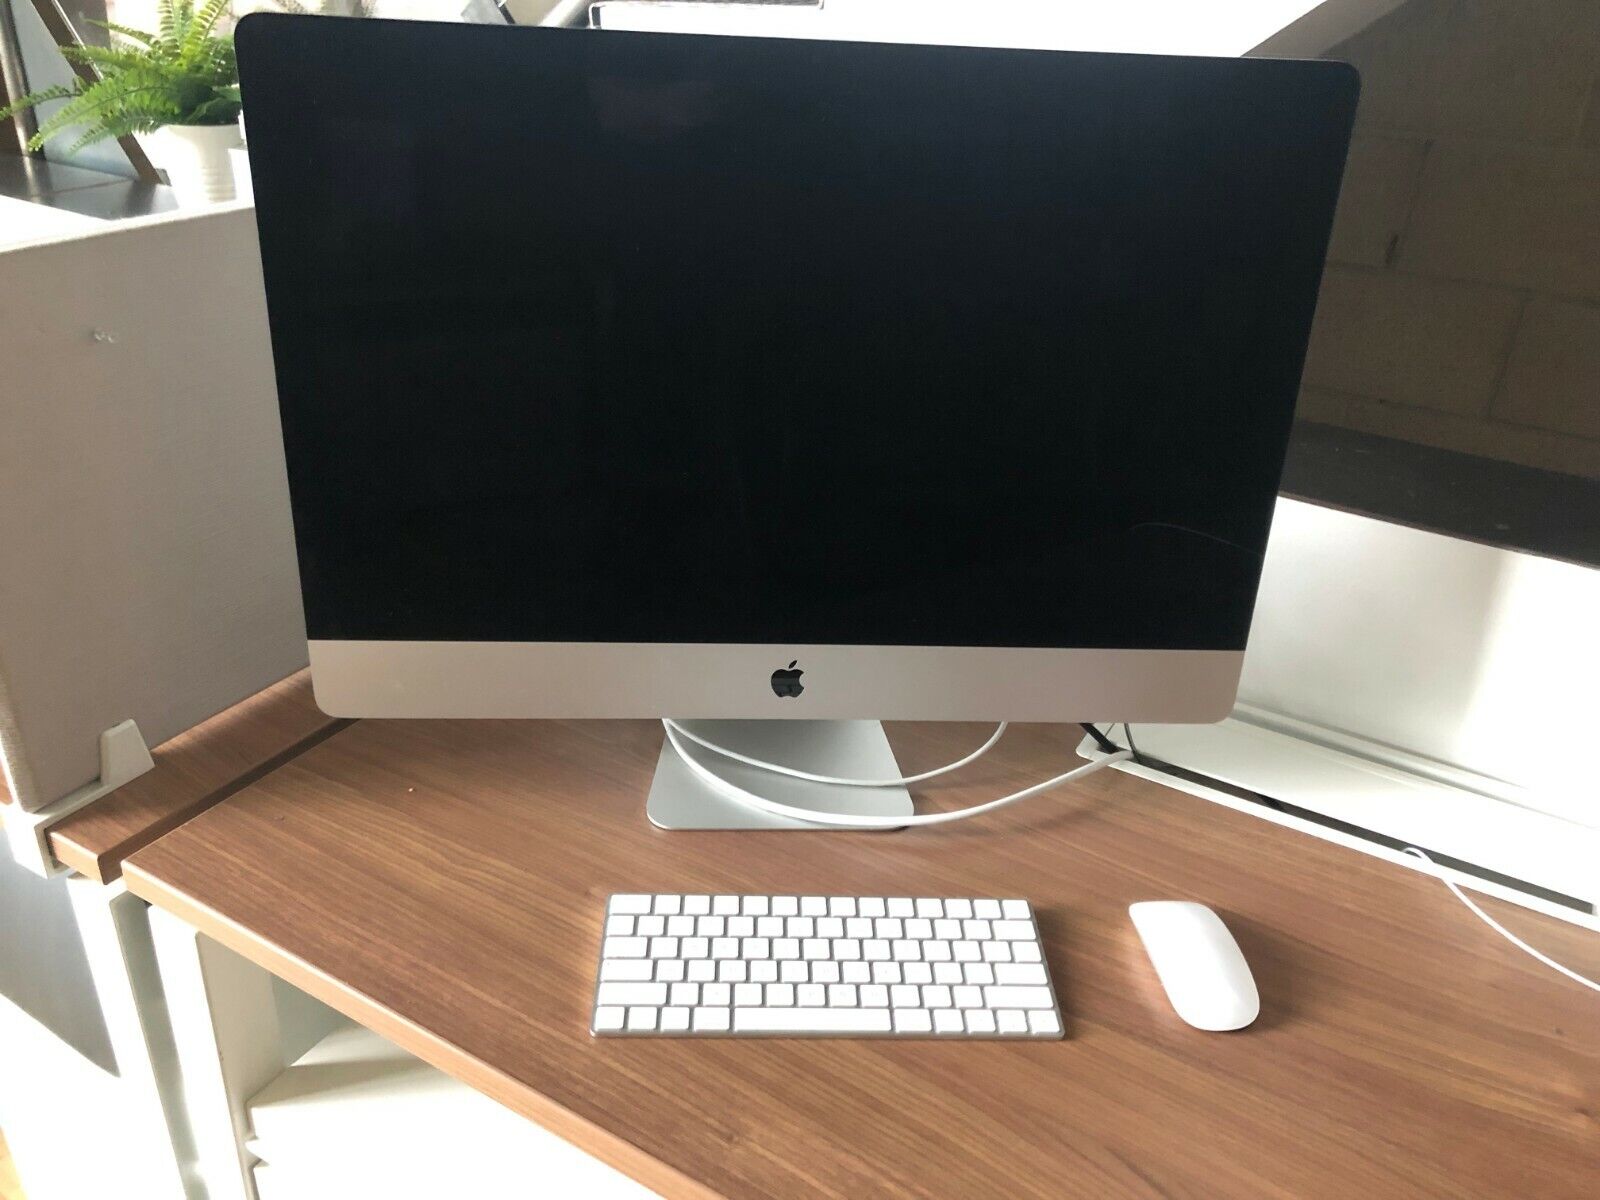 Apple iMac (27- inch Late 2013) Used and in good condition.  